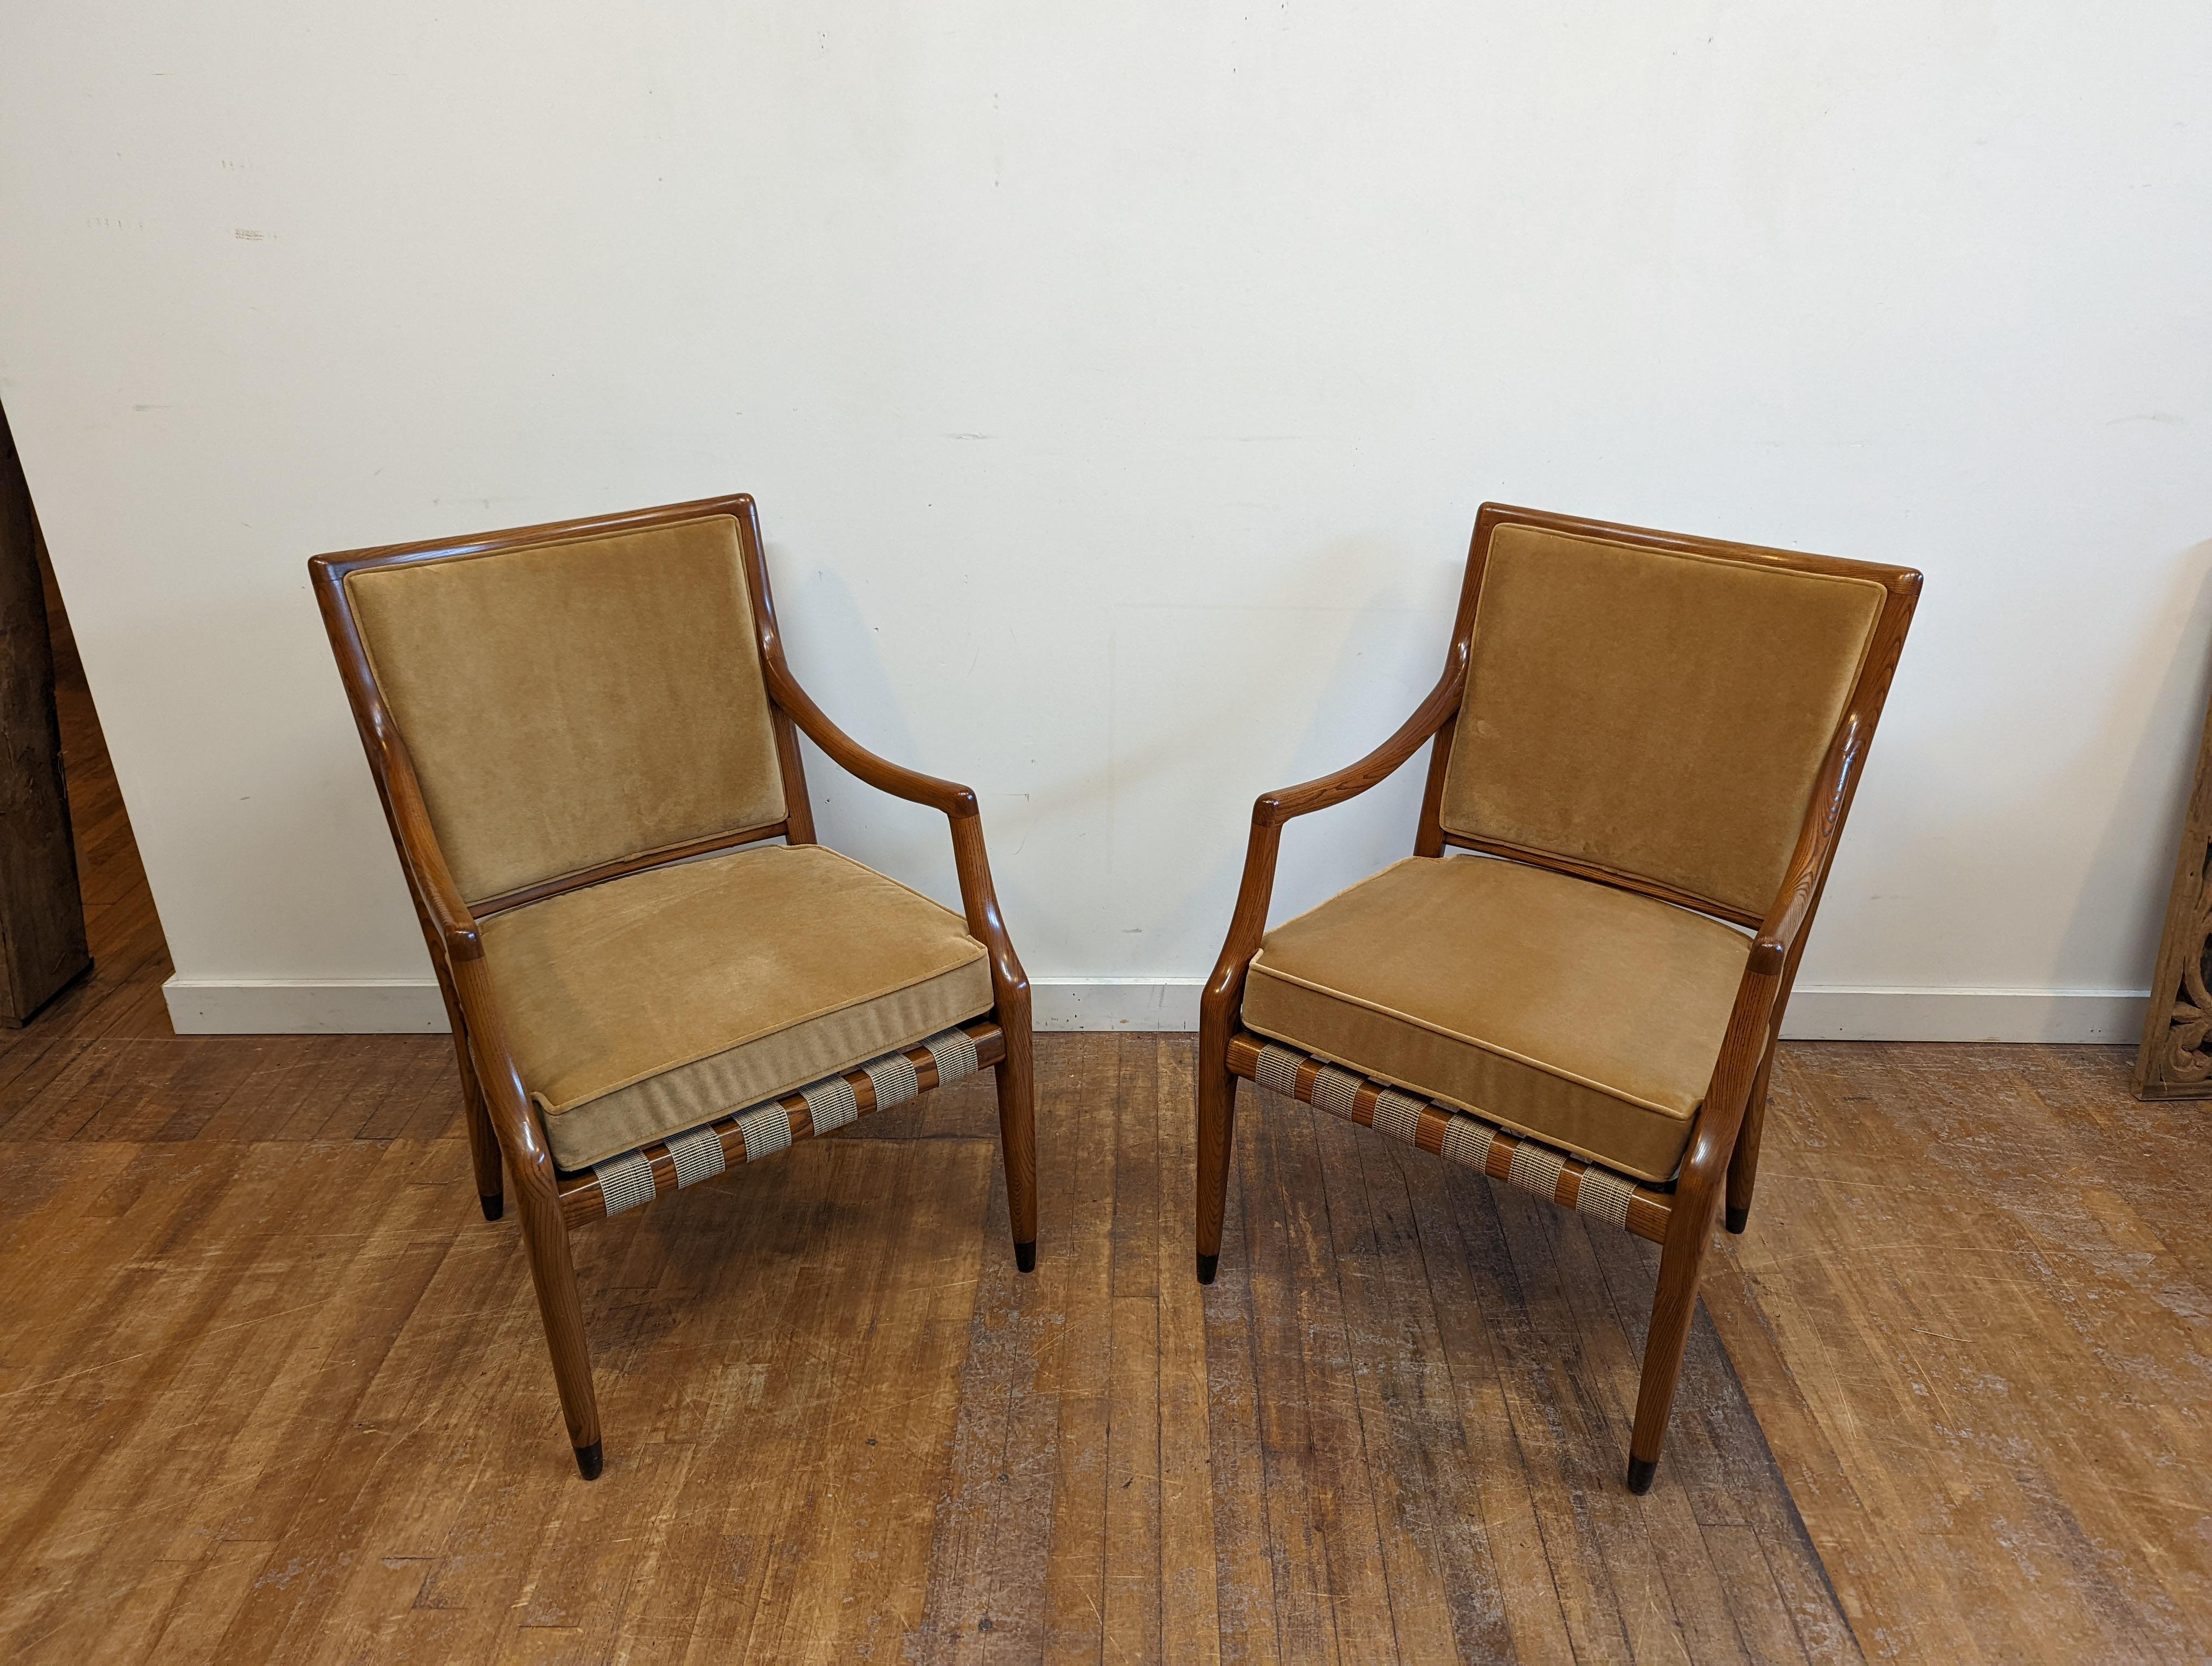 Pair of mid century arm chairs by Jack Van Der Molen for Jamestown Lounge Co. A pair of Grand Haven Chairs by Jack Van Der Molen. Noted as the famous Grand Haven Chair, winner of the coveted House Beautiful Classic Award given for exceptional value